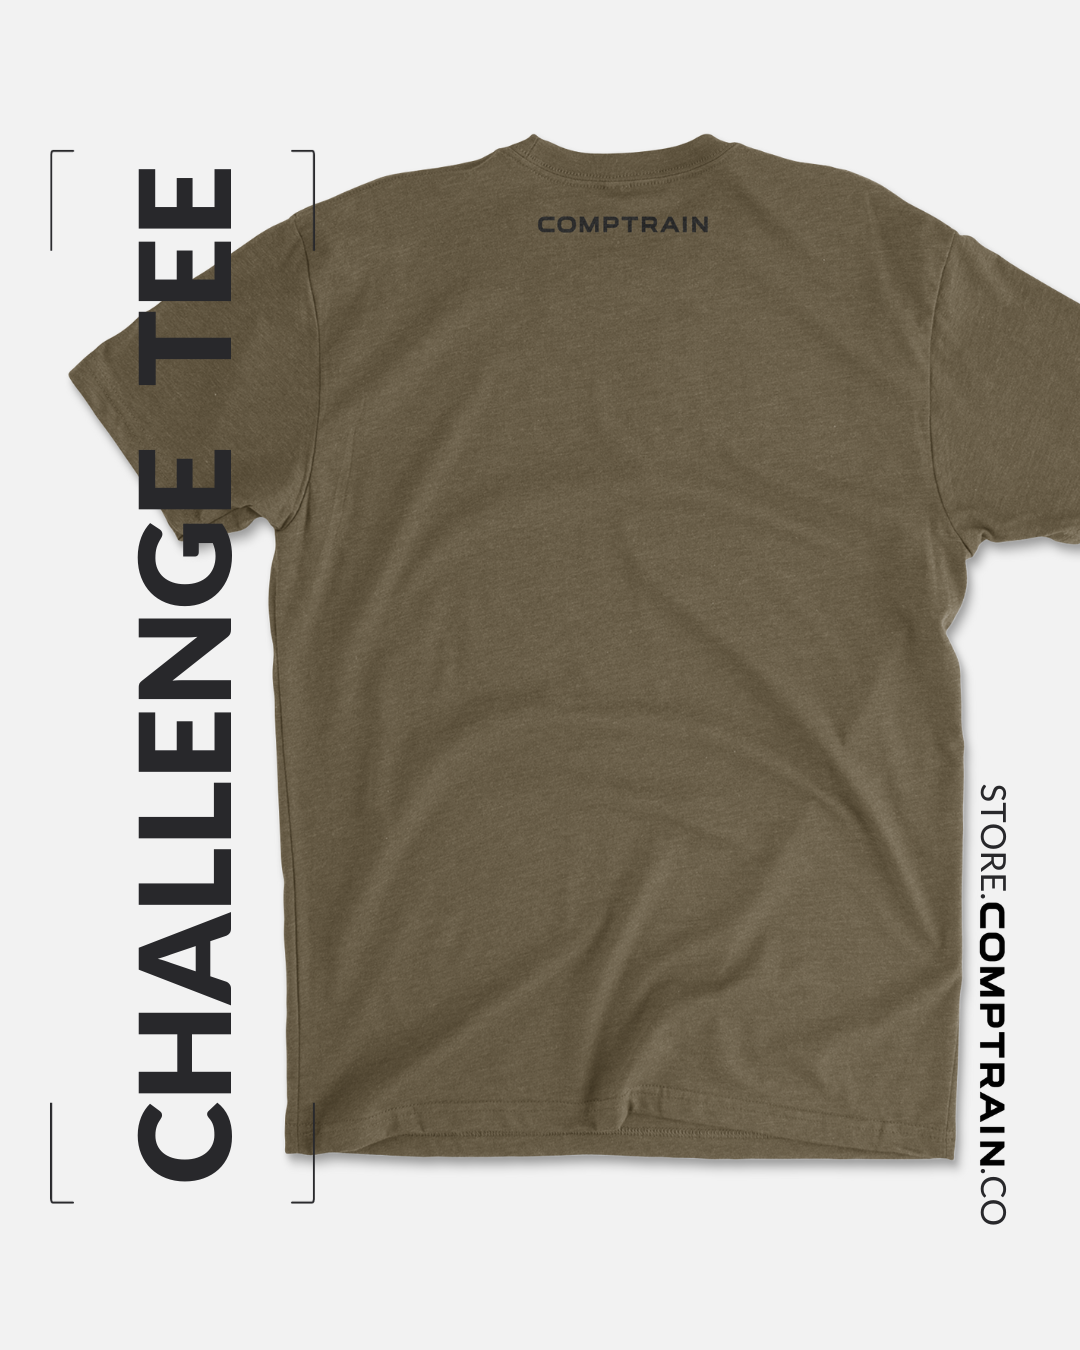 Challenge Accepted Tee